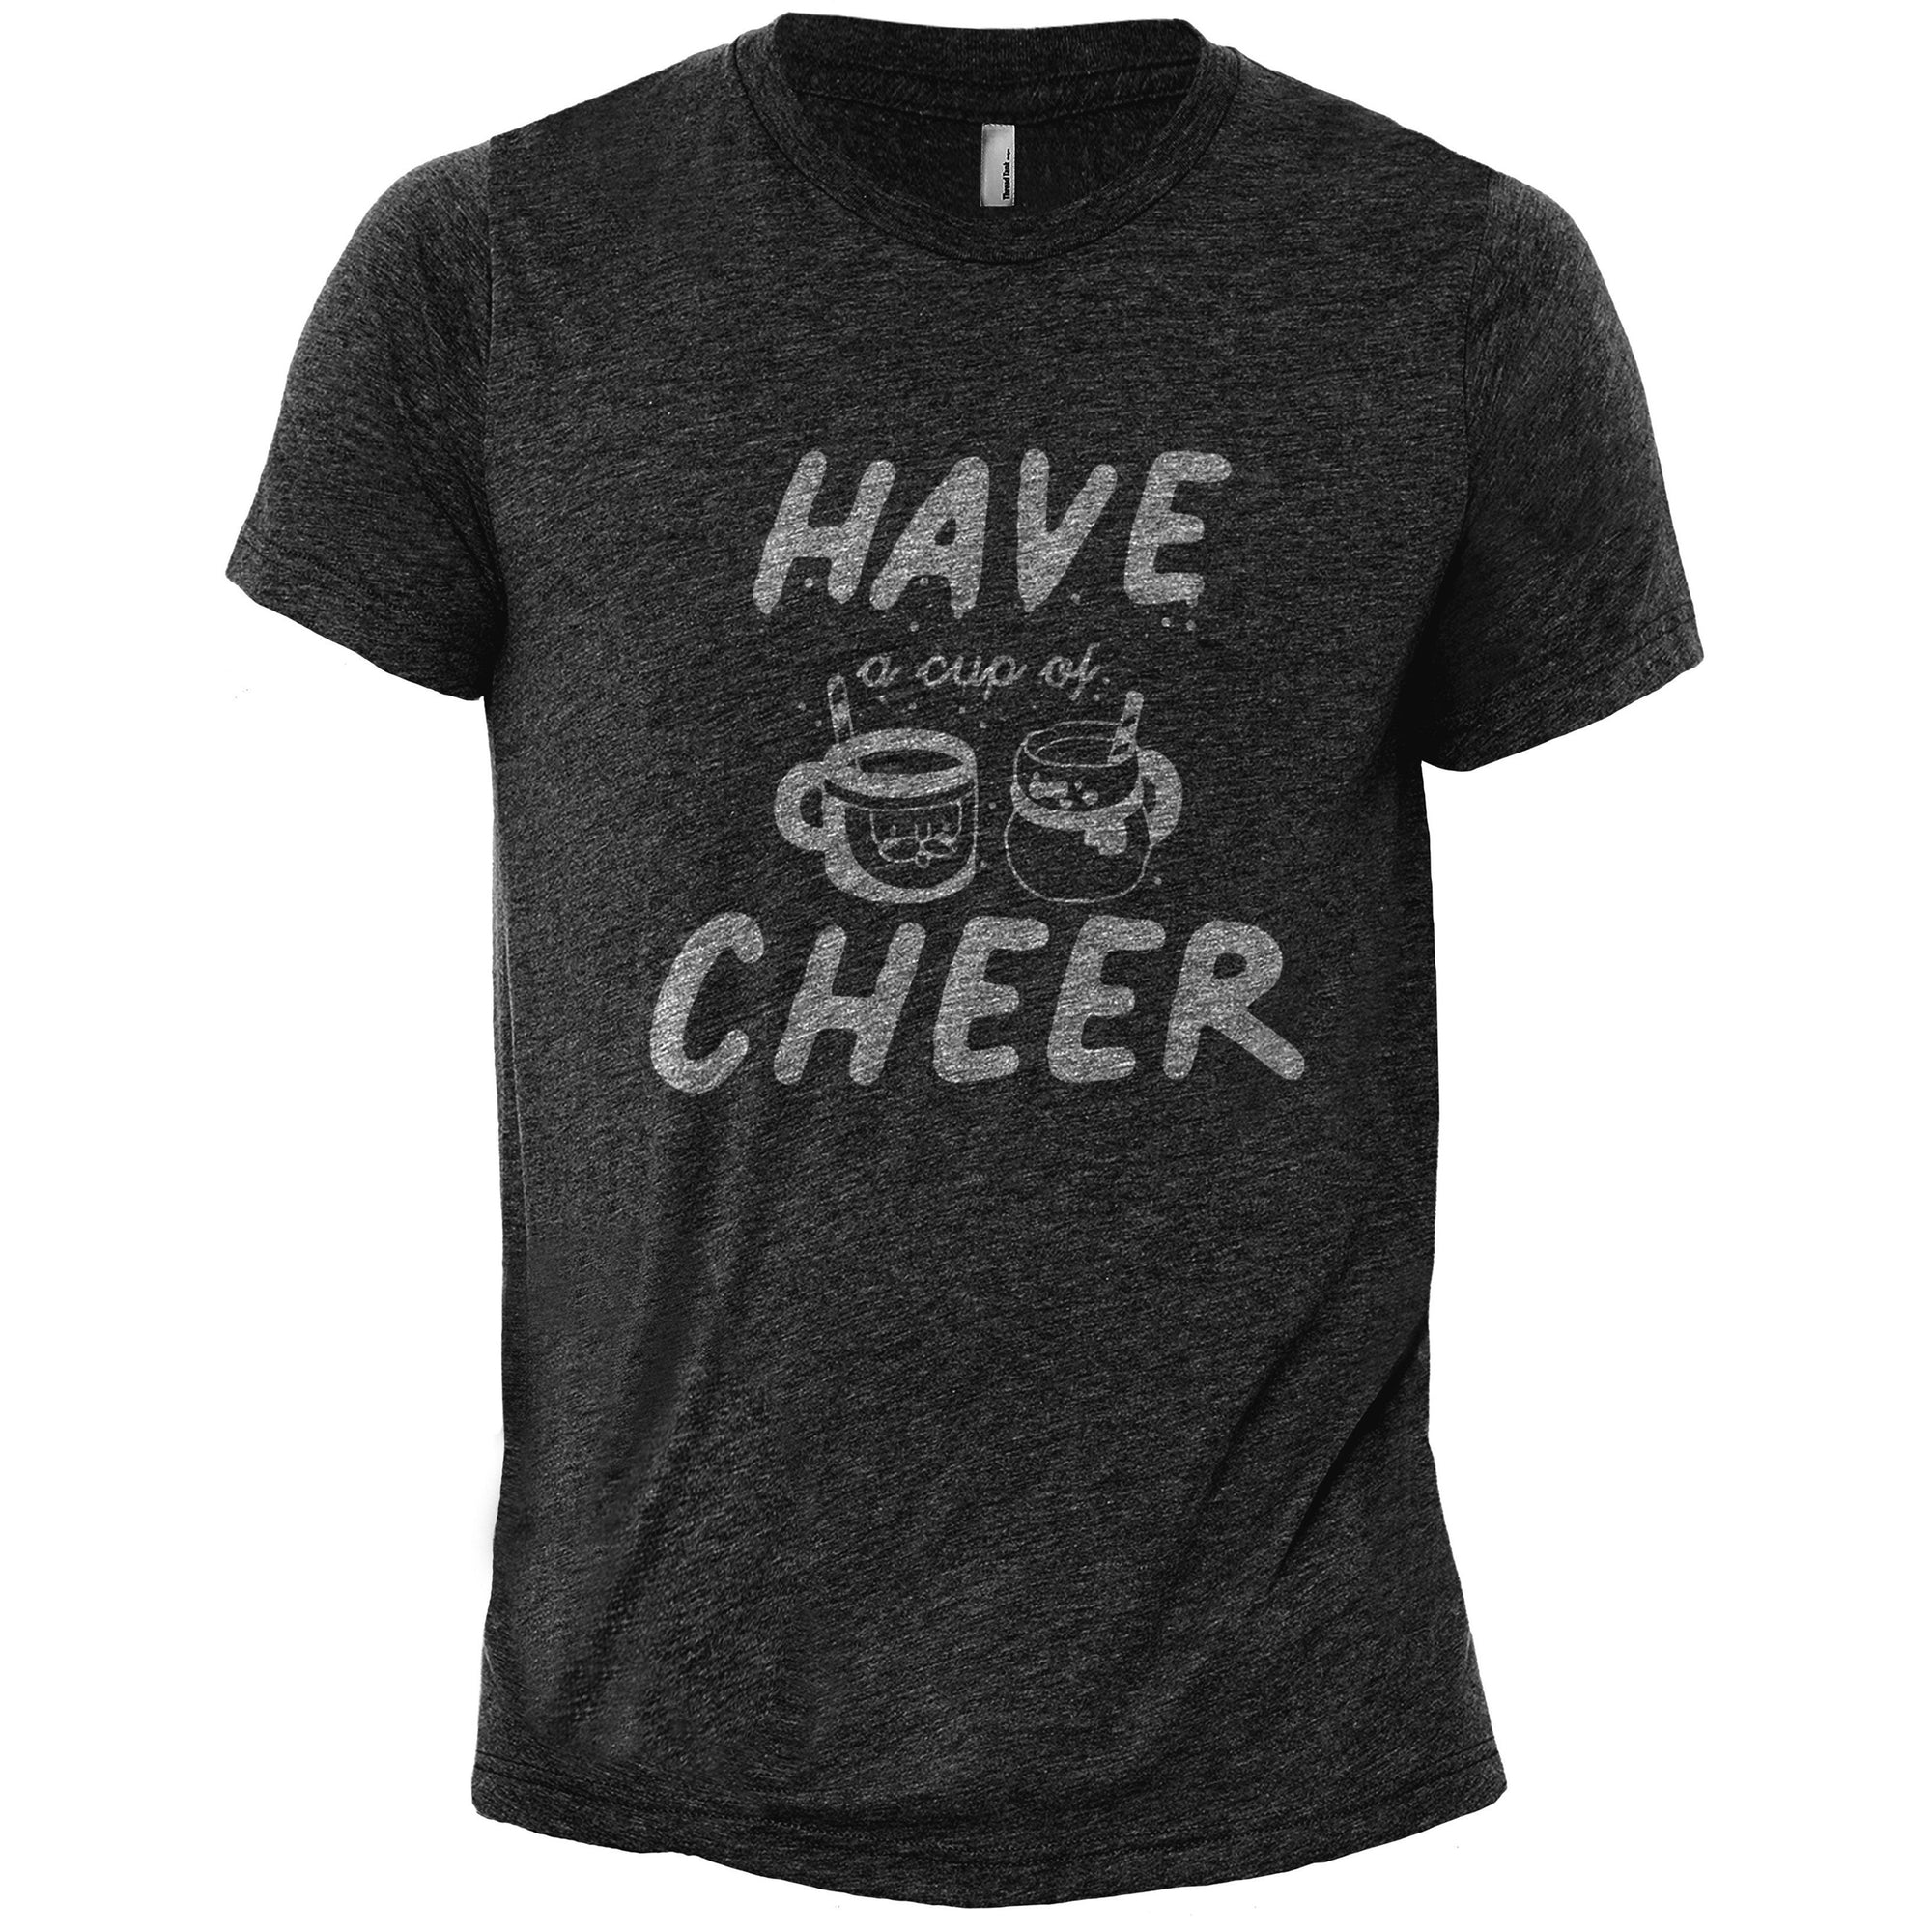 Have A Cup Of Cheer - threadtank | stories you can wear